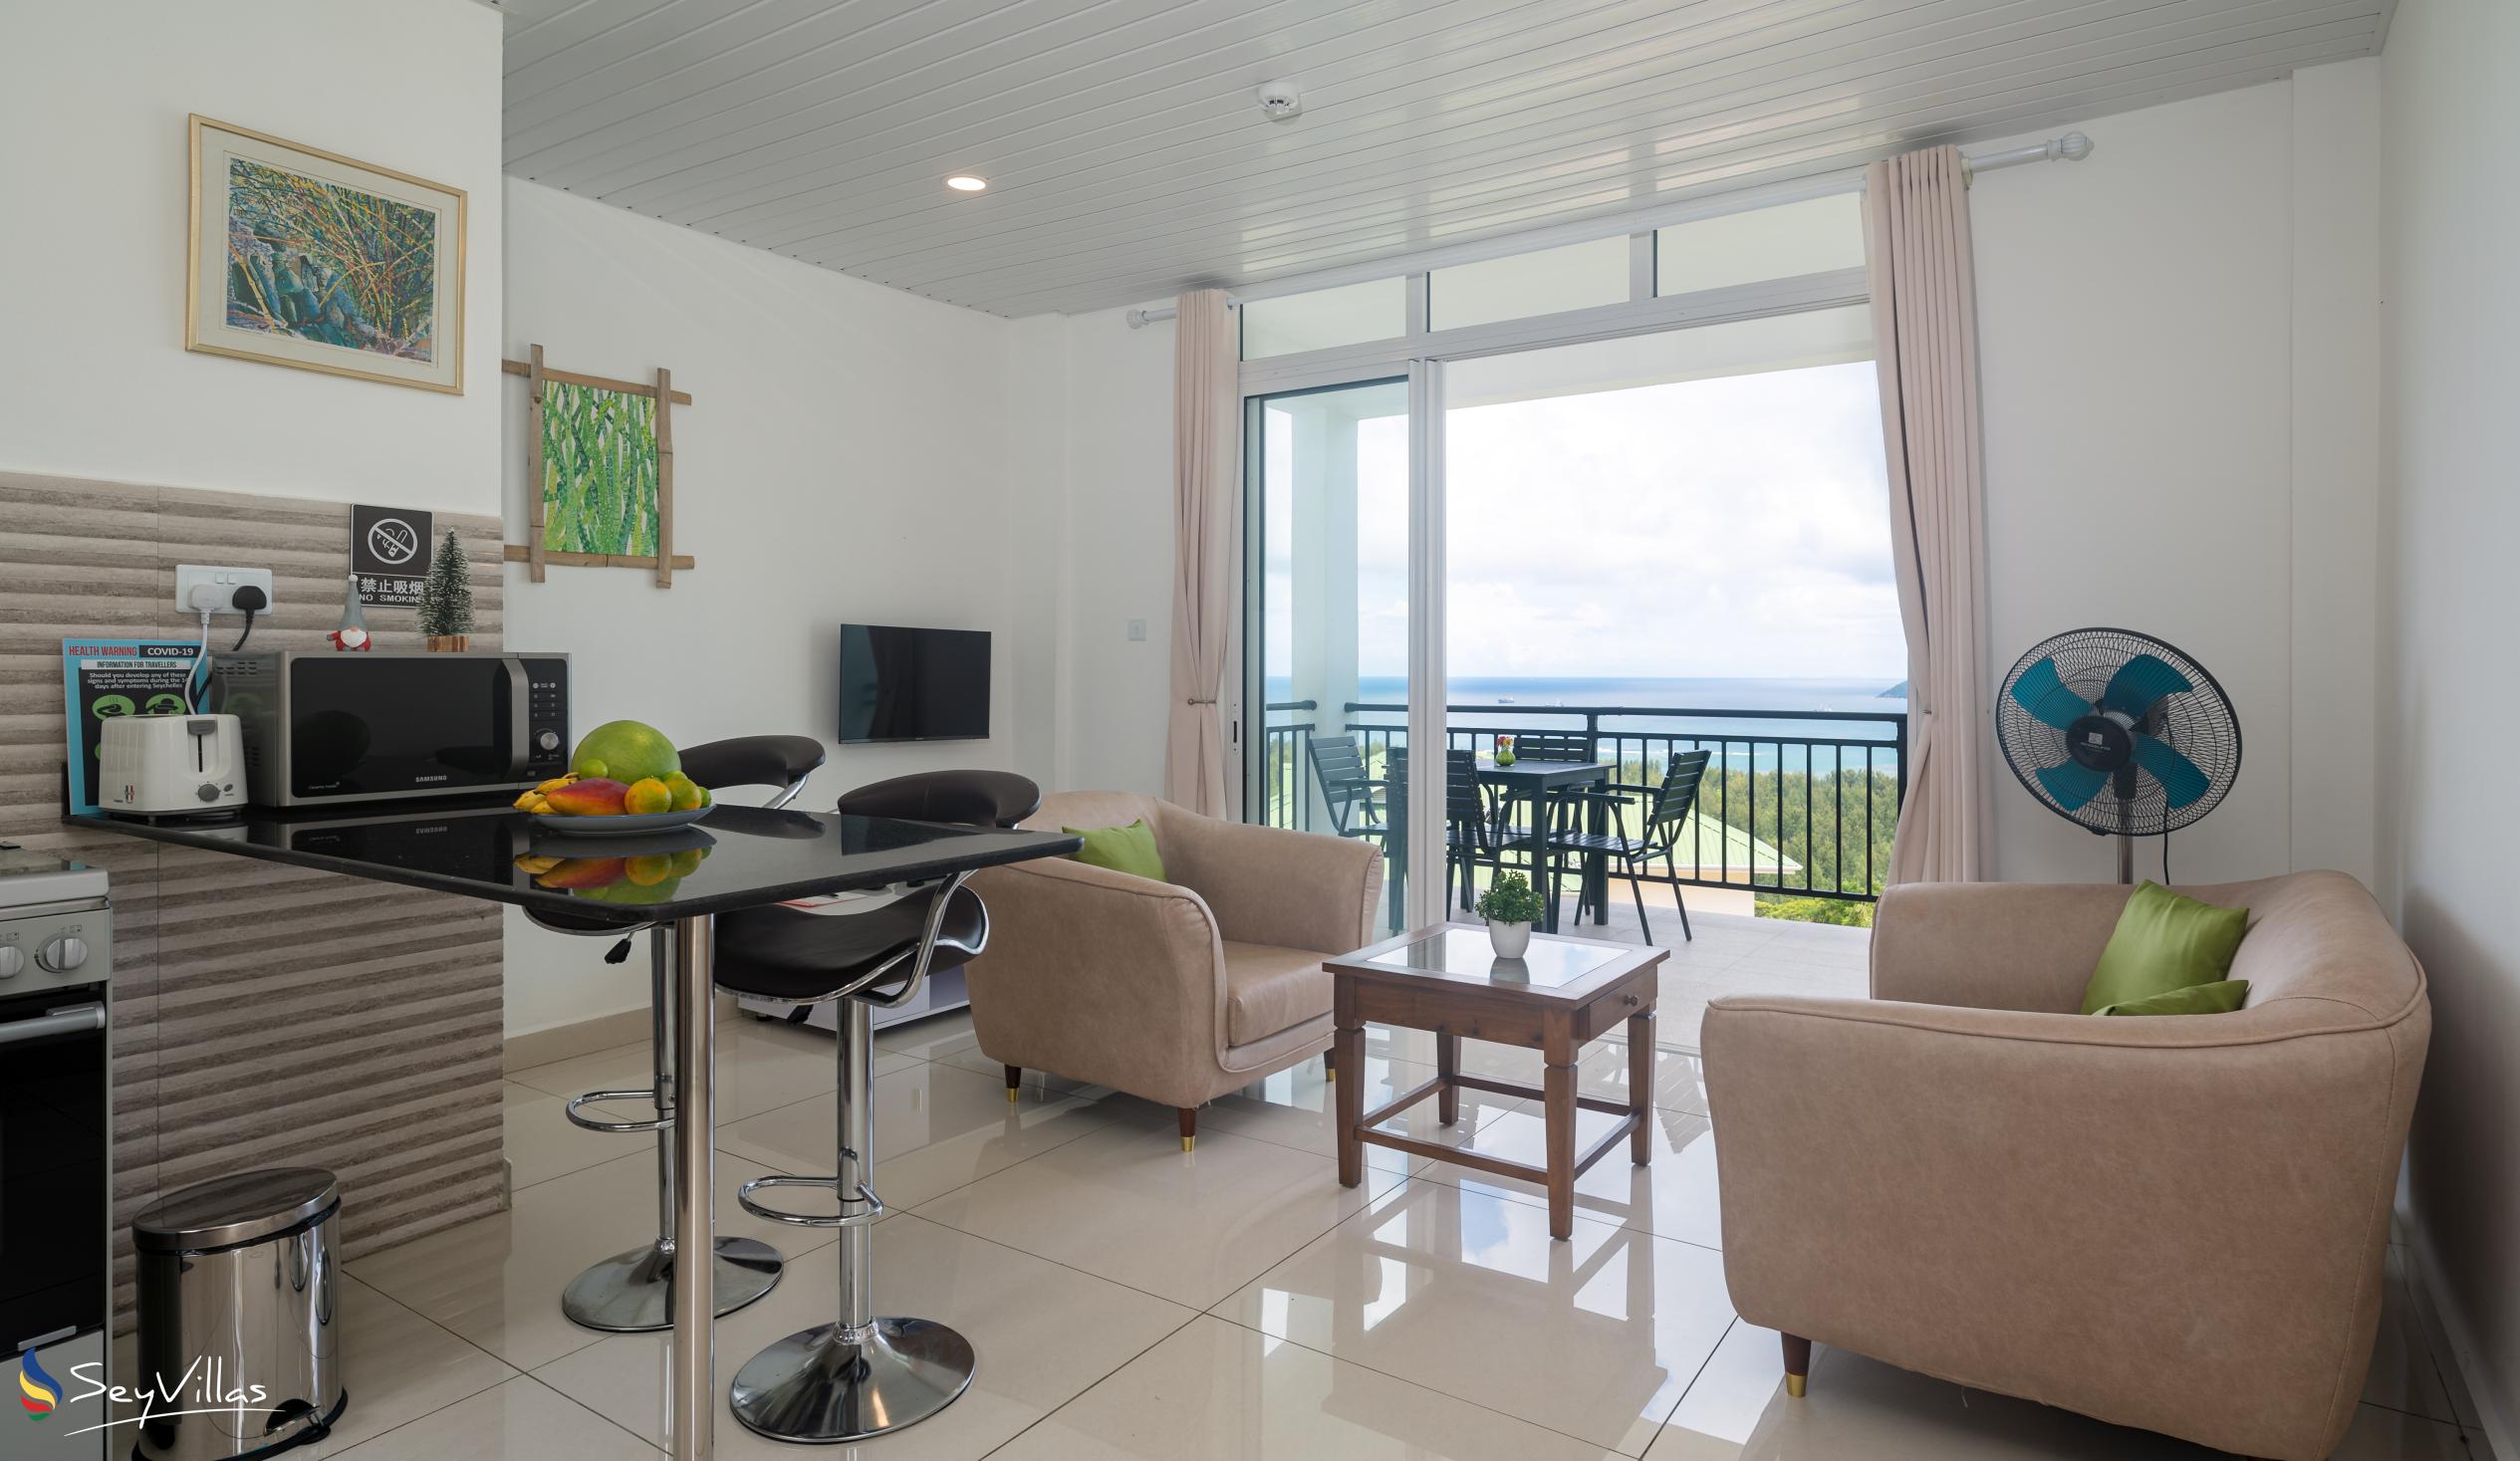 Photo 52: Creole Pearl Self Catering - 1-Bedroom Apartment - Mahé (Seychelles)